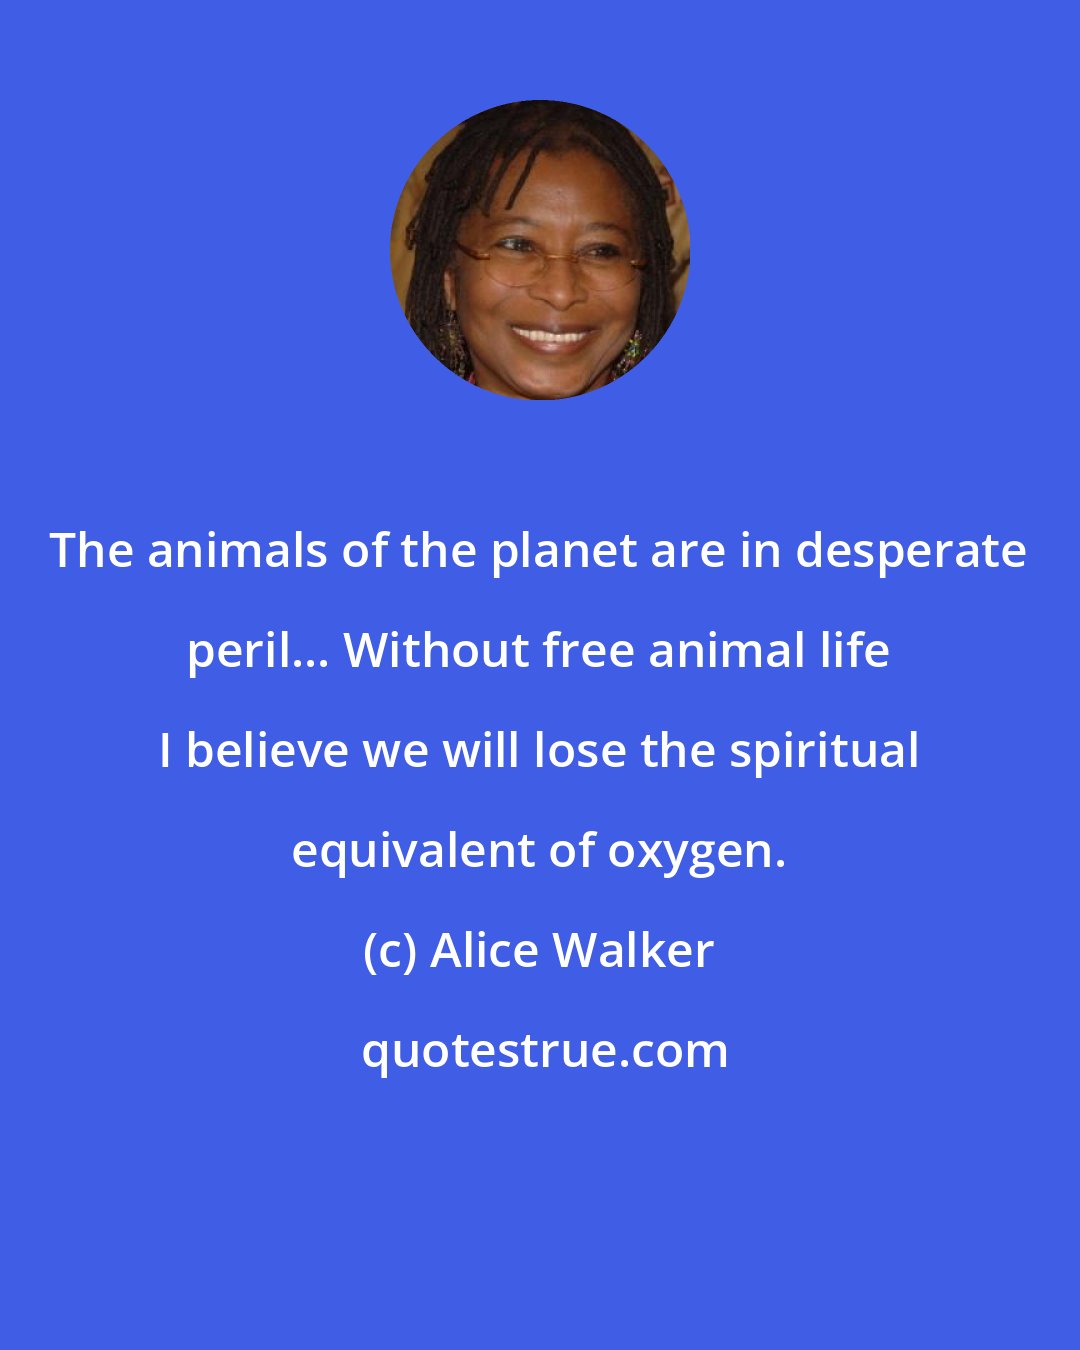 Alice Walker: The animals of the planet are in desperate peril... Without free animal life I believe we will lose the spiritual equivalent of oxygen.